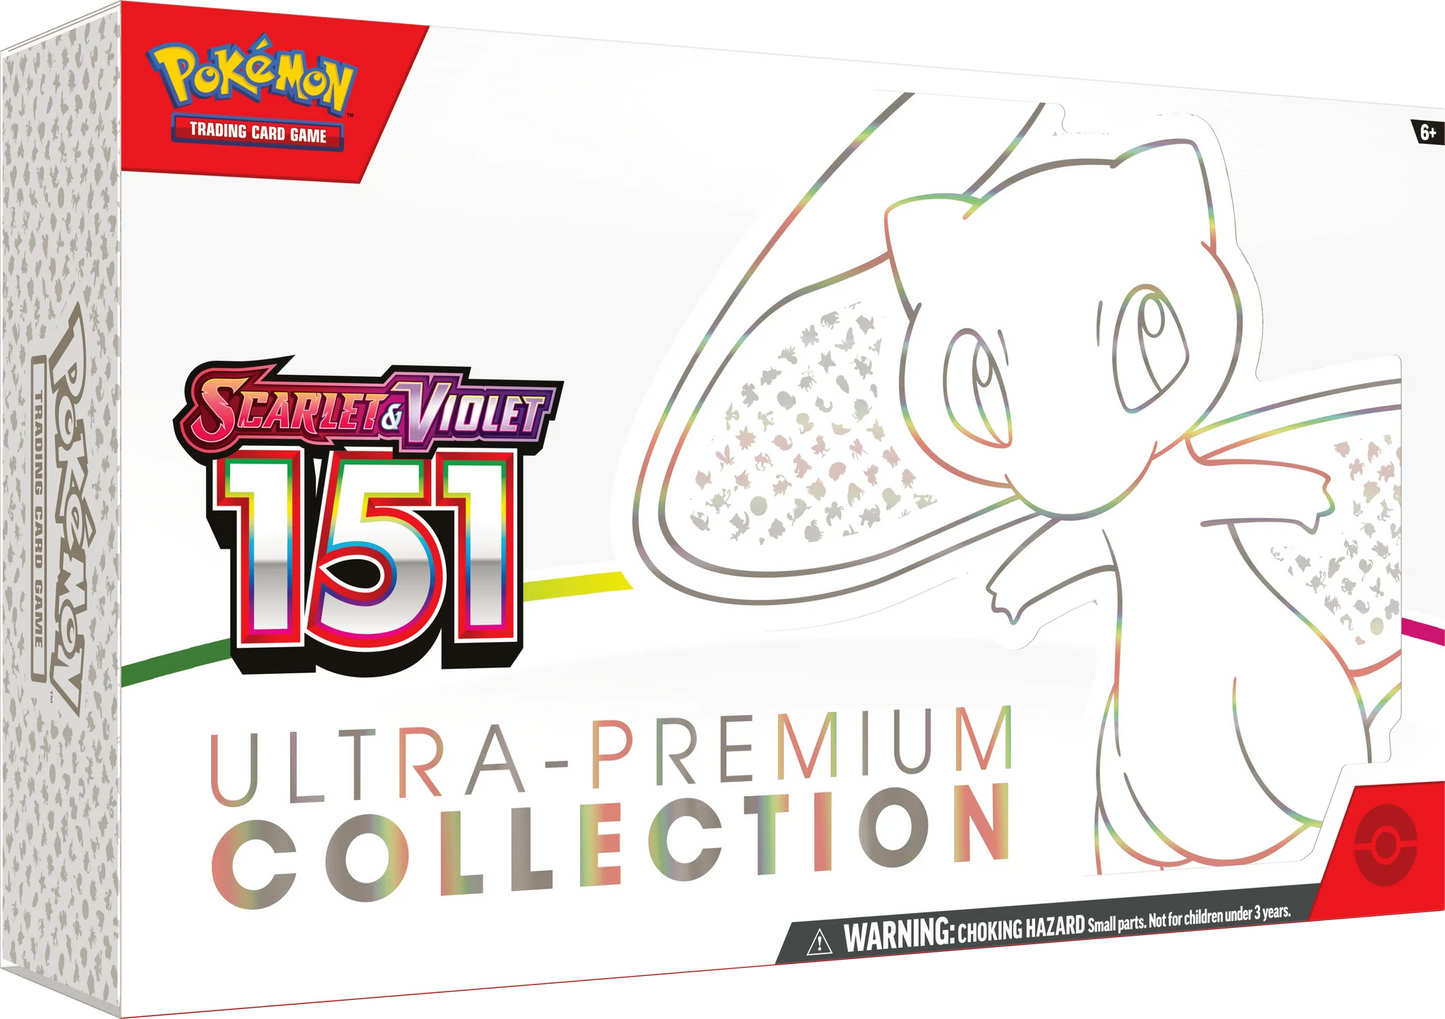 Pokemon TCG - Scarlet and Violet 151 Ultra Premium Collection